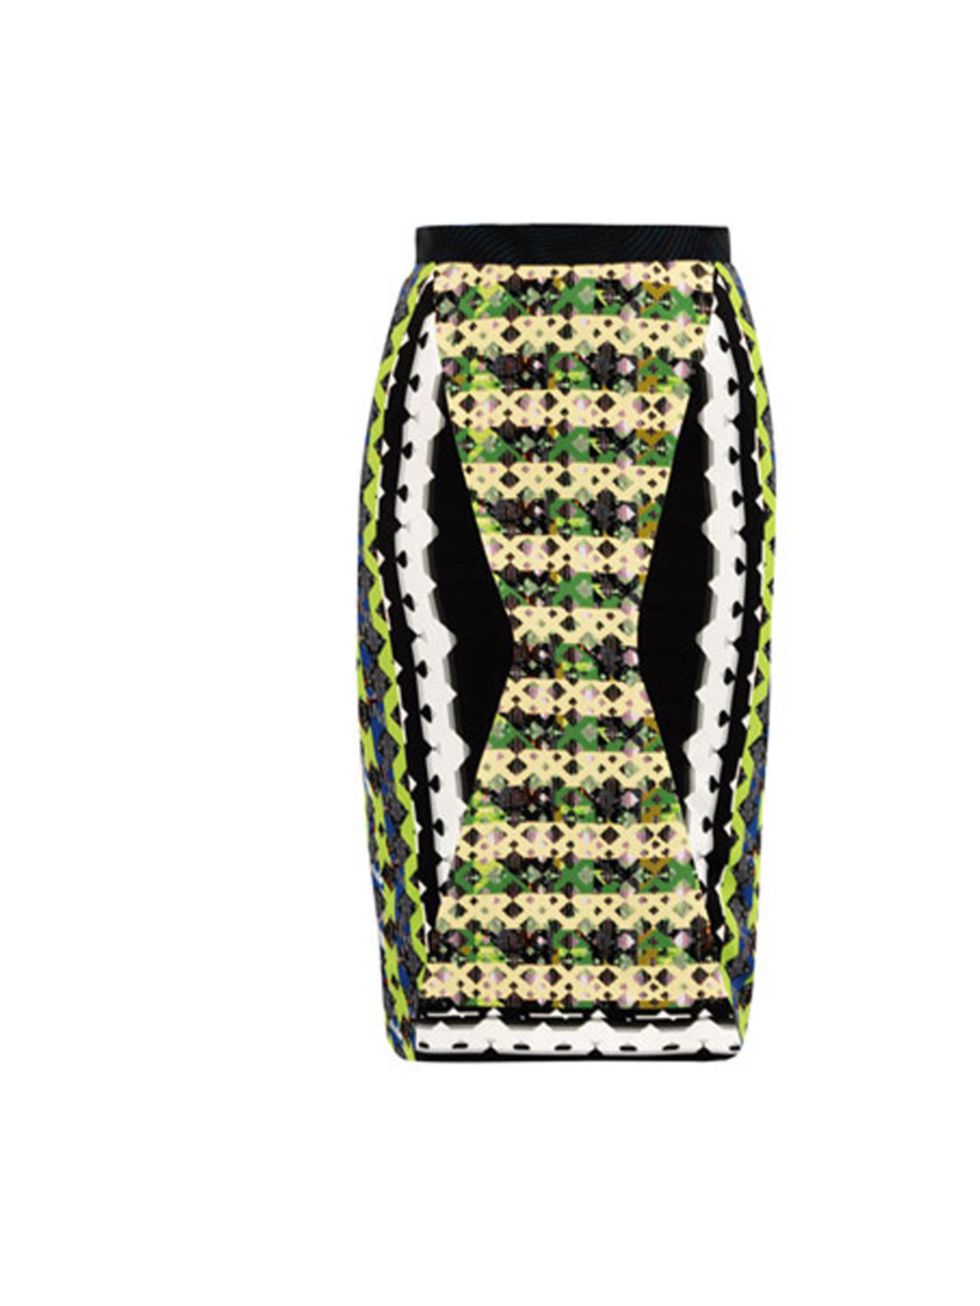 <p>Peter Pilotto geometric print skirt, £580, at Matches</p><p><a href="http://shopping.elleuk.com/browse?fts=peter+pilotto+geometric+print+skirt">BUY NOW</a></p>